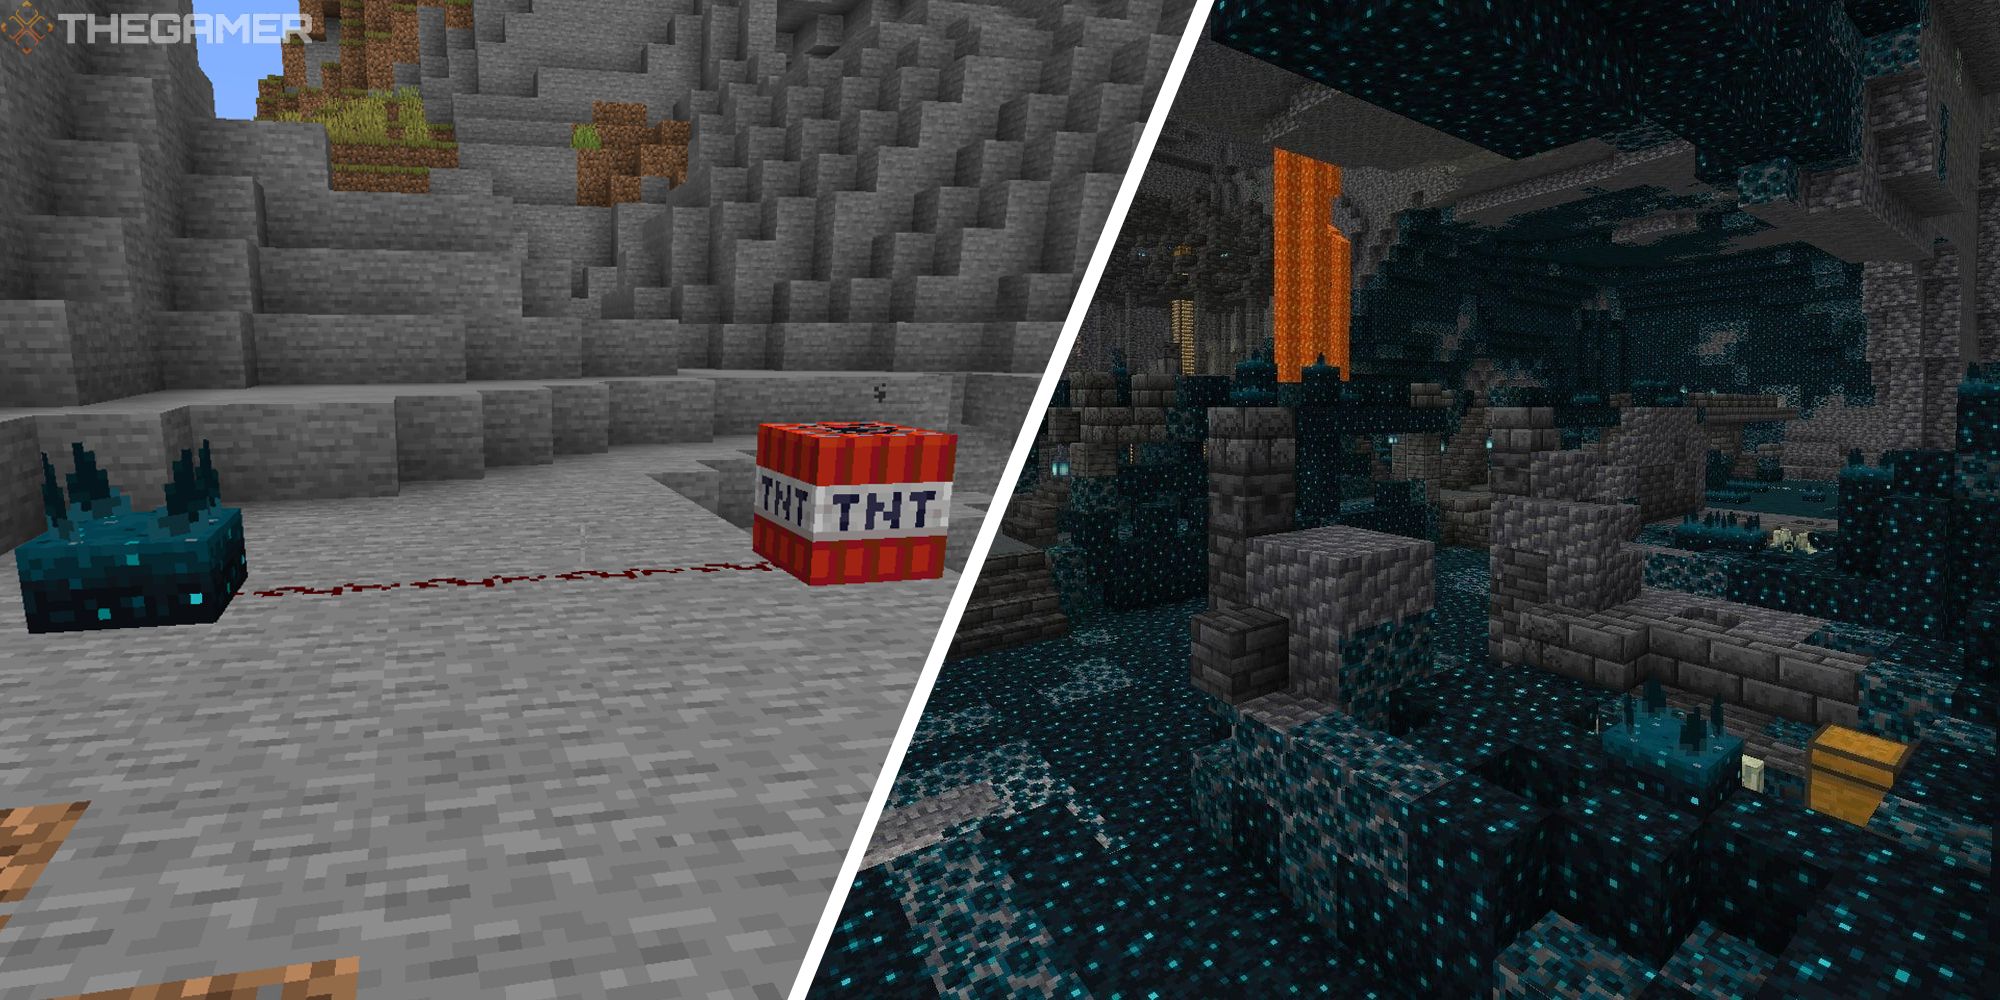 image of tnt trap next to iamge of ancient city